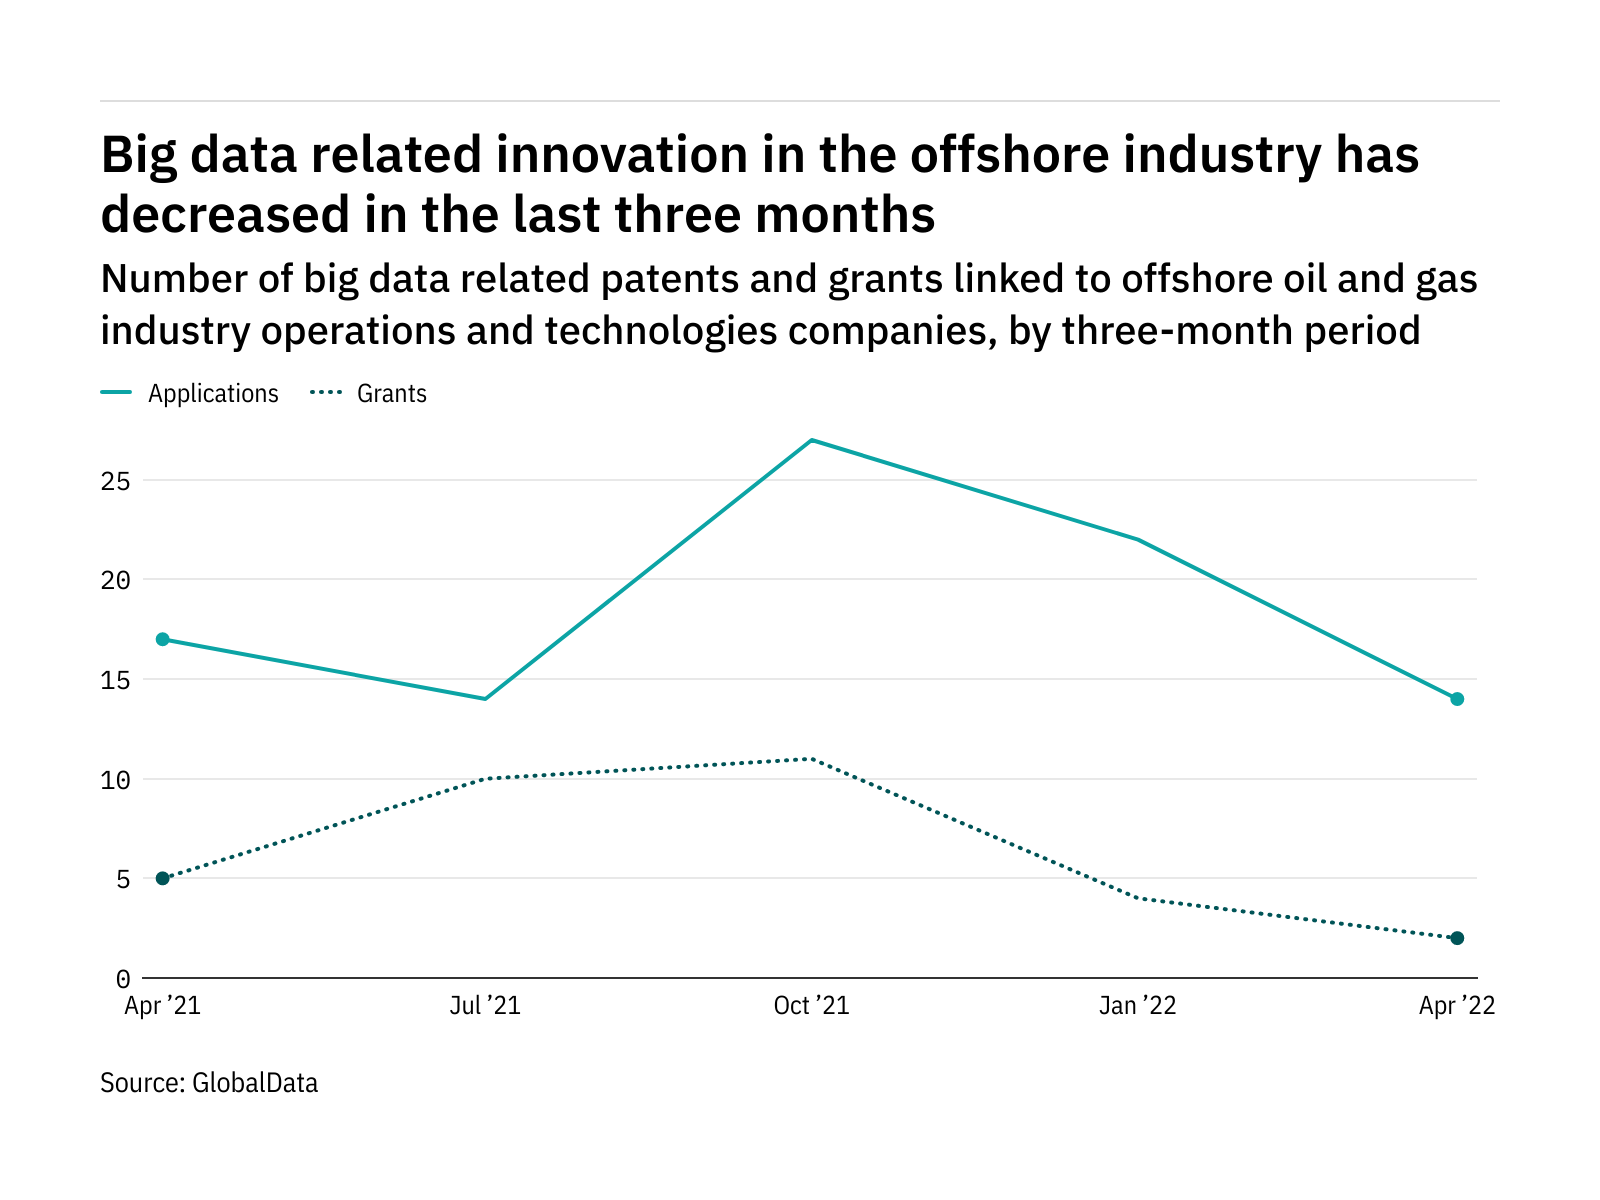 Big data innovation among offshore industry companies has dropped off in the last year